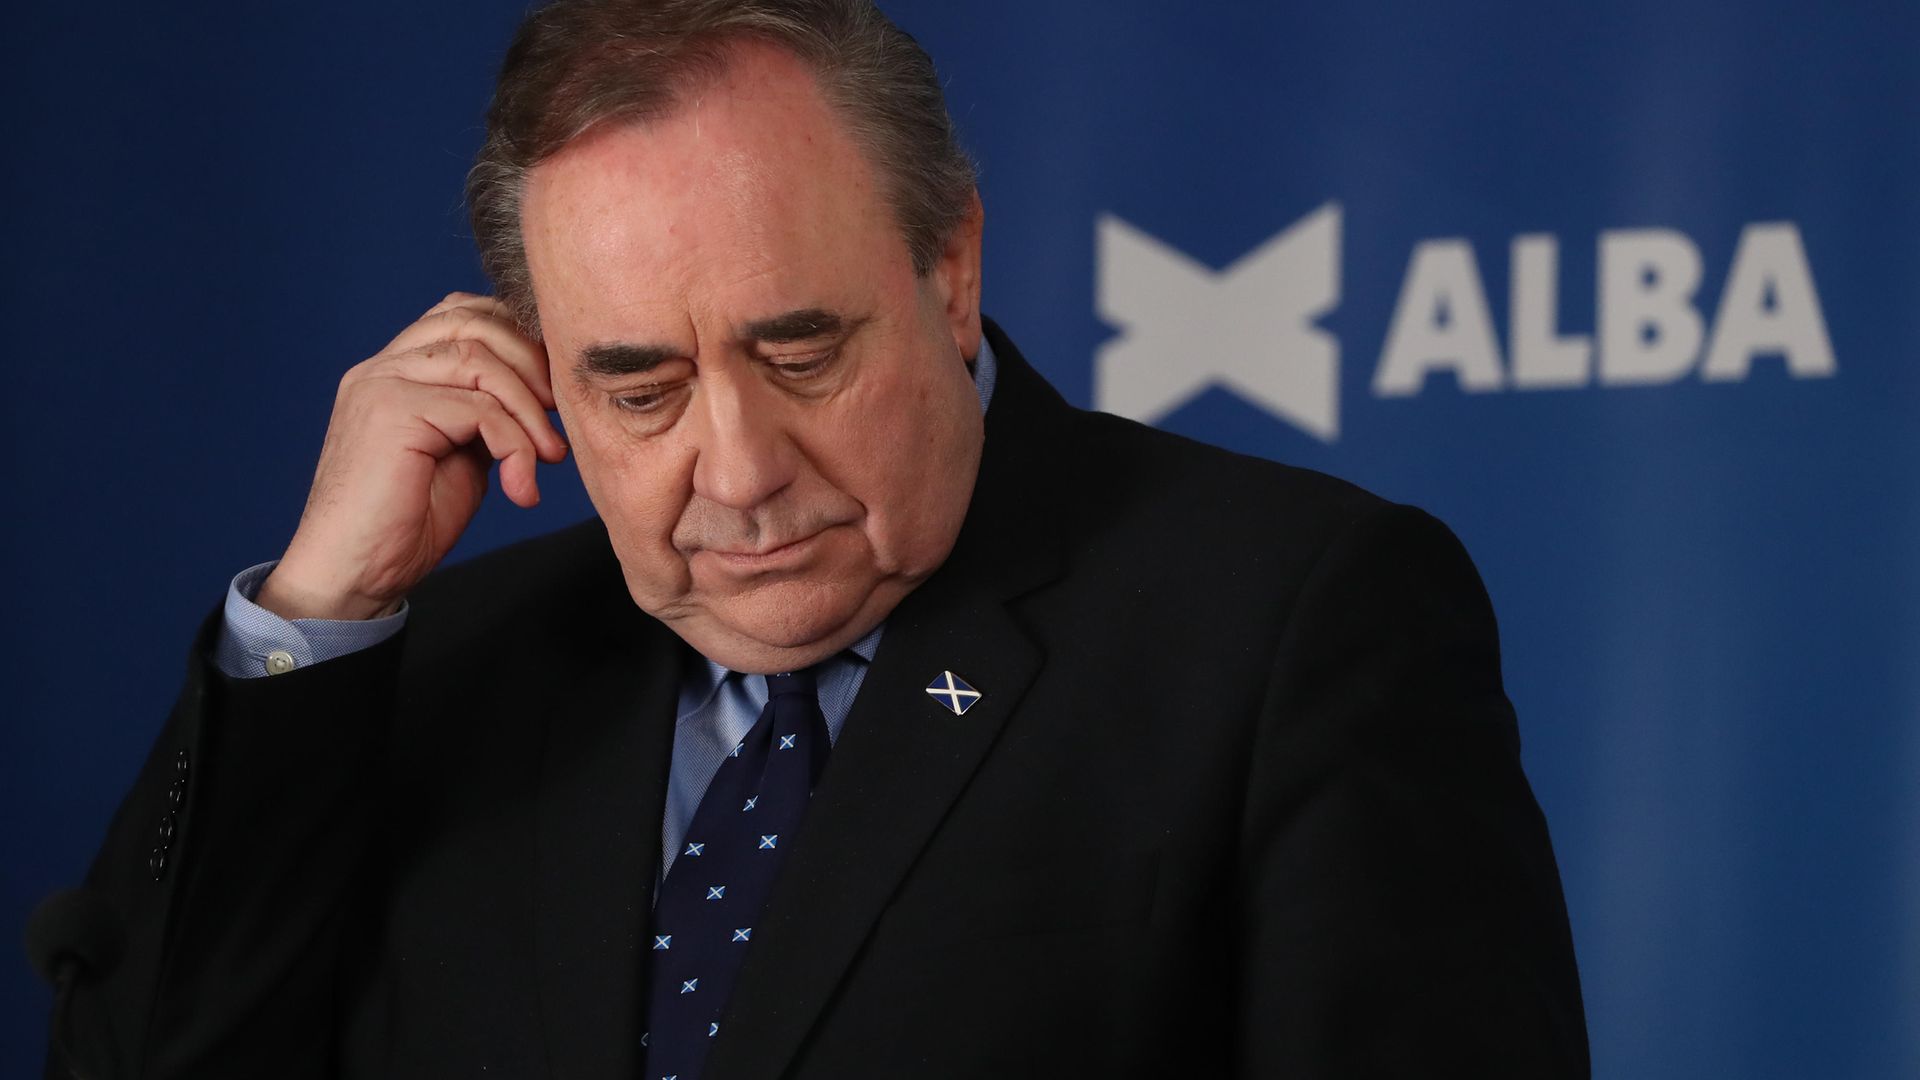 ALBA Party leader and former first minister of Scotland, Alex Salmond - Credit: PA